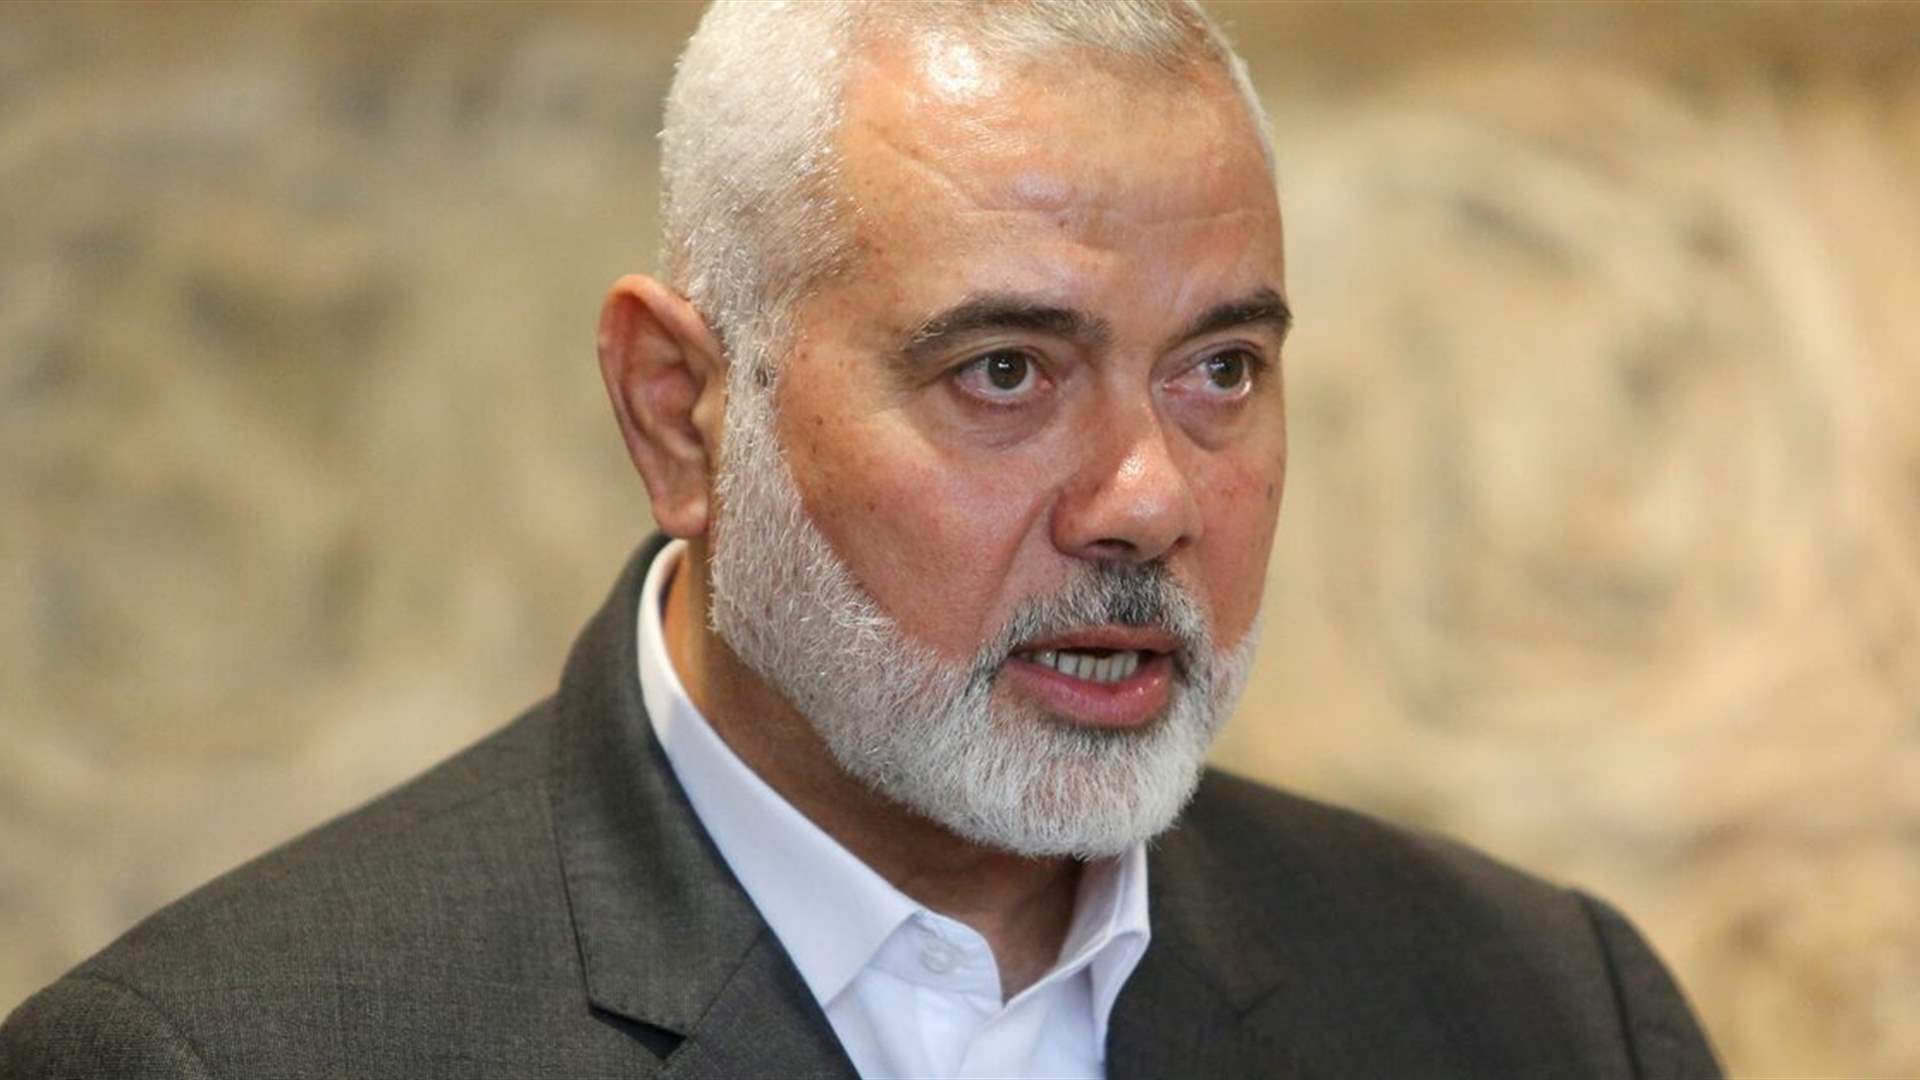 Hamas&#39; Haniyeh says: Israeli modifications to ceasefire proposal led to current stalemate